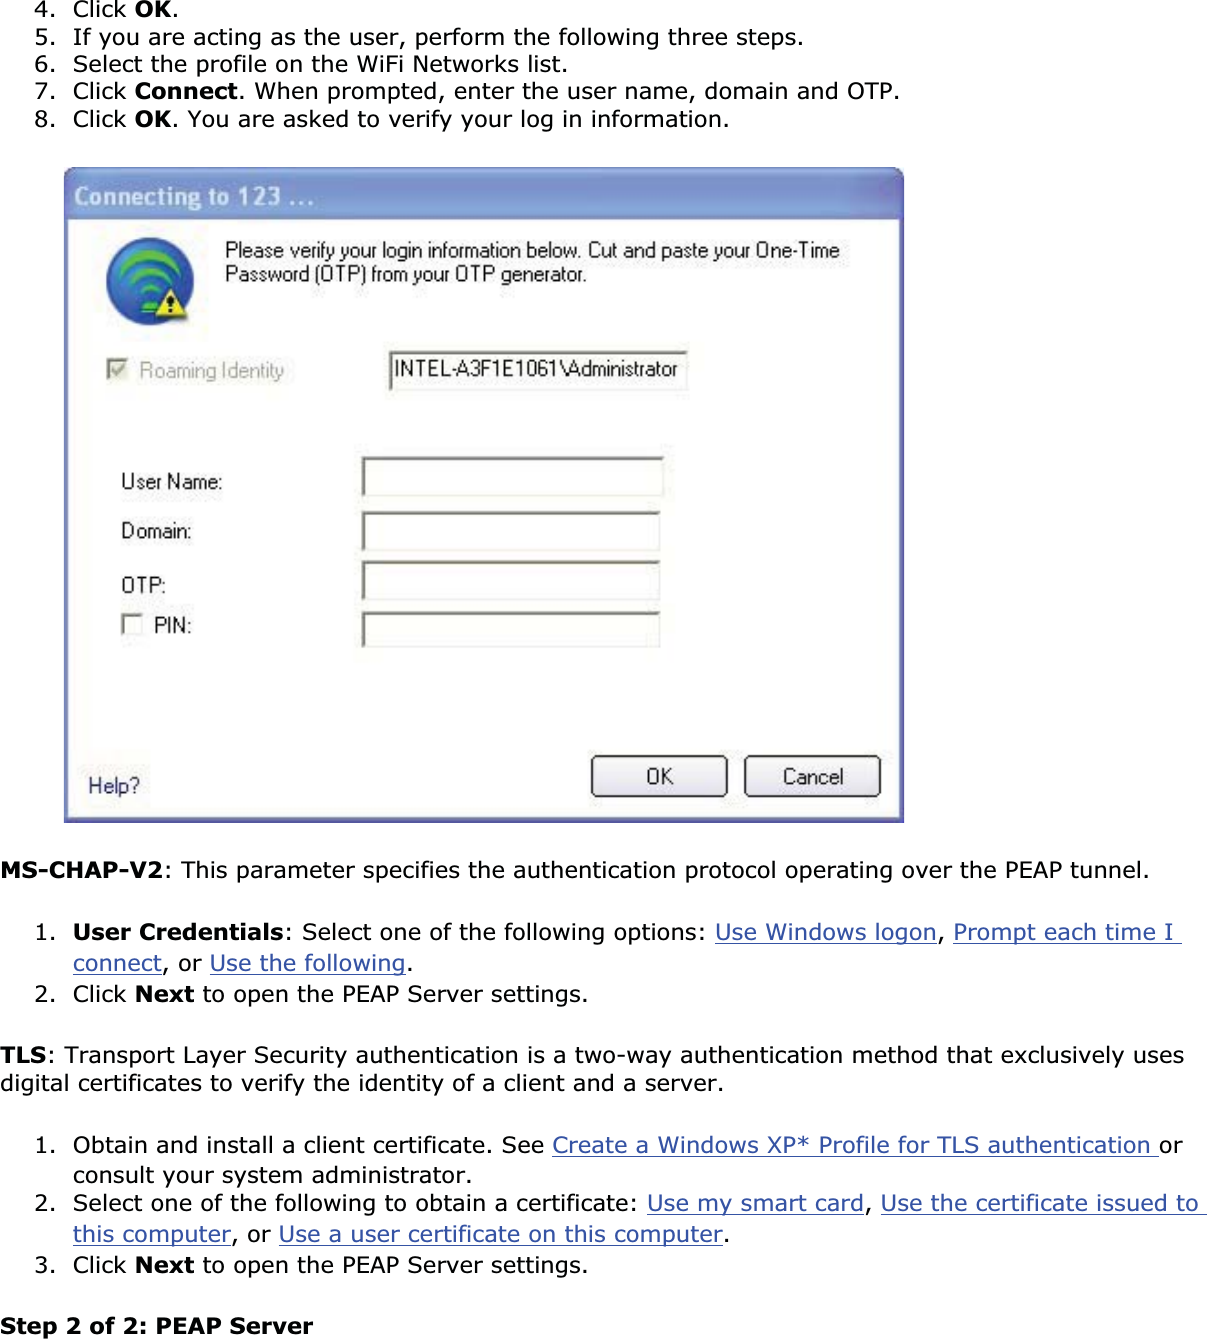 4. Click OK.5. If you are acting as the user, perform the following three steps. 6. Select the profile on the WiFi Networks list. 7. Click Connect. When prompted, enter the user name, domain and OTP.8. Click OK. You are asked to verify your log in information. MS-CHAP-V2: This parameter specifies the authentication protocol operating over the PEAP tunnel. 1. User Credentials: Select one of the following options: Use Windows logon,Prompt each time I connect, or Use the following.2. Click Next to open the PEAP Server settings.TLS: Transport Layer Security authentication is a two-way authentication method that exclusively uses digital certificates to verify the identity of a client and a server. 1. Obtain and install a client certificate. See Create a Windows XP* Profile for TLS authentication orconsult your system administrator.2. Select one of the following to obtain a certificate: Use my smart card,Use the certificate issued to this computer, or Use a user certificate on this computer.3. Click Next to open the PEAP Server settings.Step 2 of 2: PEAP Server